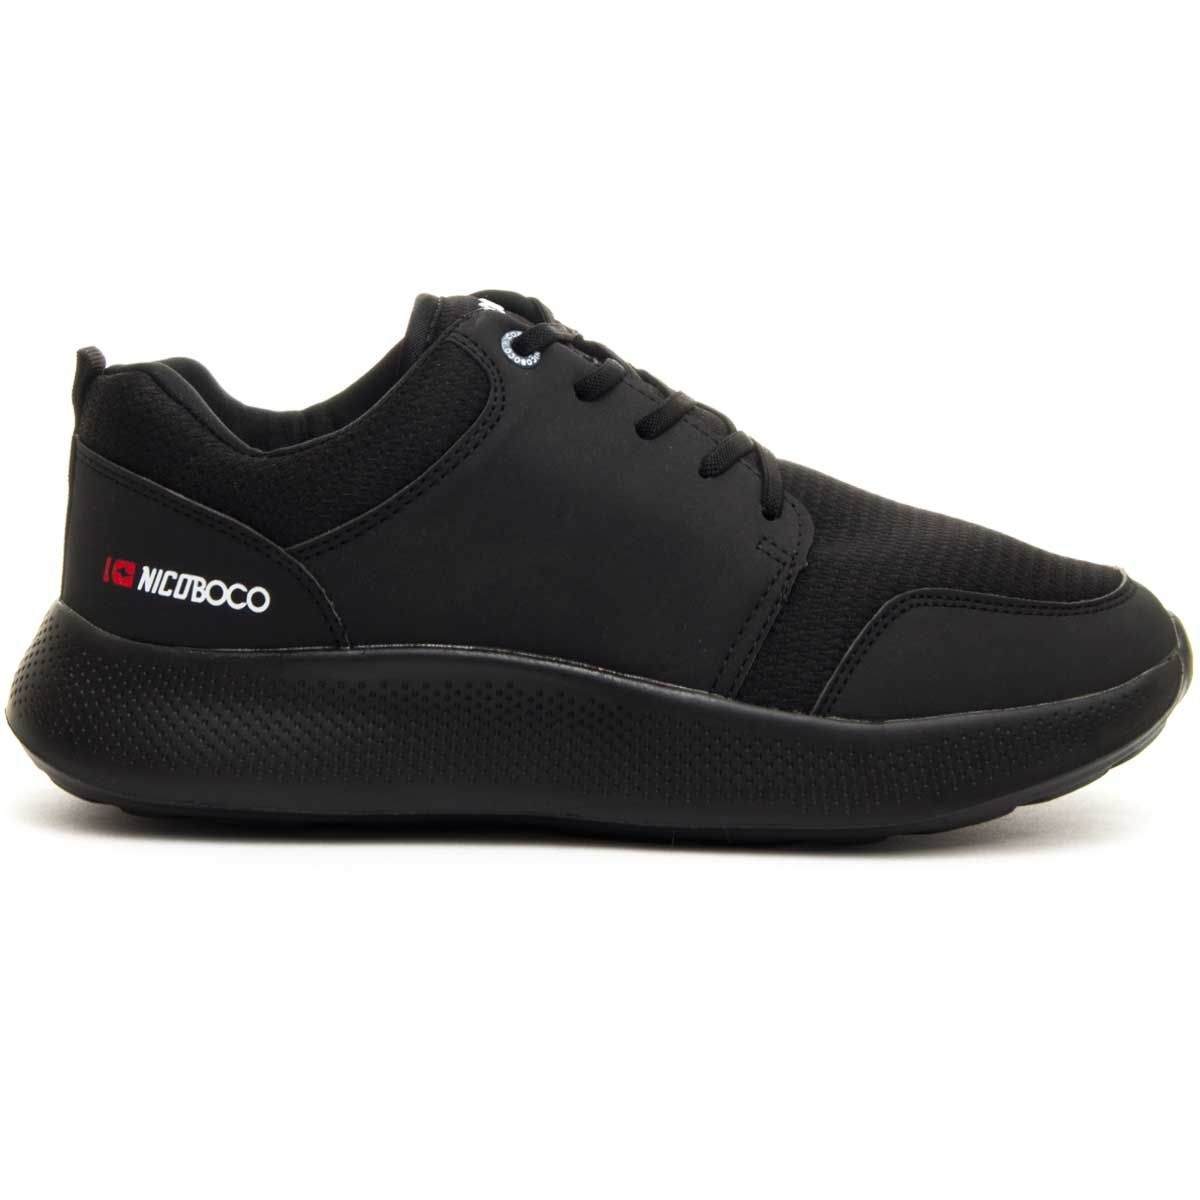 Deportivo Comodo for men. Close of cord for better fitting at the foot. Anti-slip rubber floor and with the ENERGY RETURN technology that is based on the extra injection of rubber particles that allows an immediate recovery of the impact. That is why, all items treated with Energy Return, offer greater benefits in flexibility and comfort. The result? Nice sensations and padding effect, thanks to the biggest cushioning the tread. Interior and exterior manufactured in textile for better perspiration. Padded template. Sewing doubly reinforced for durability. Previous and rear reinforcement for greater resistance. Capsula by Nicoboco collection.